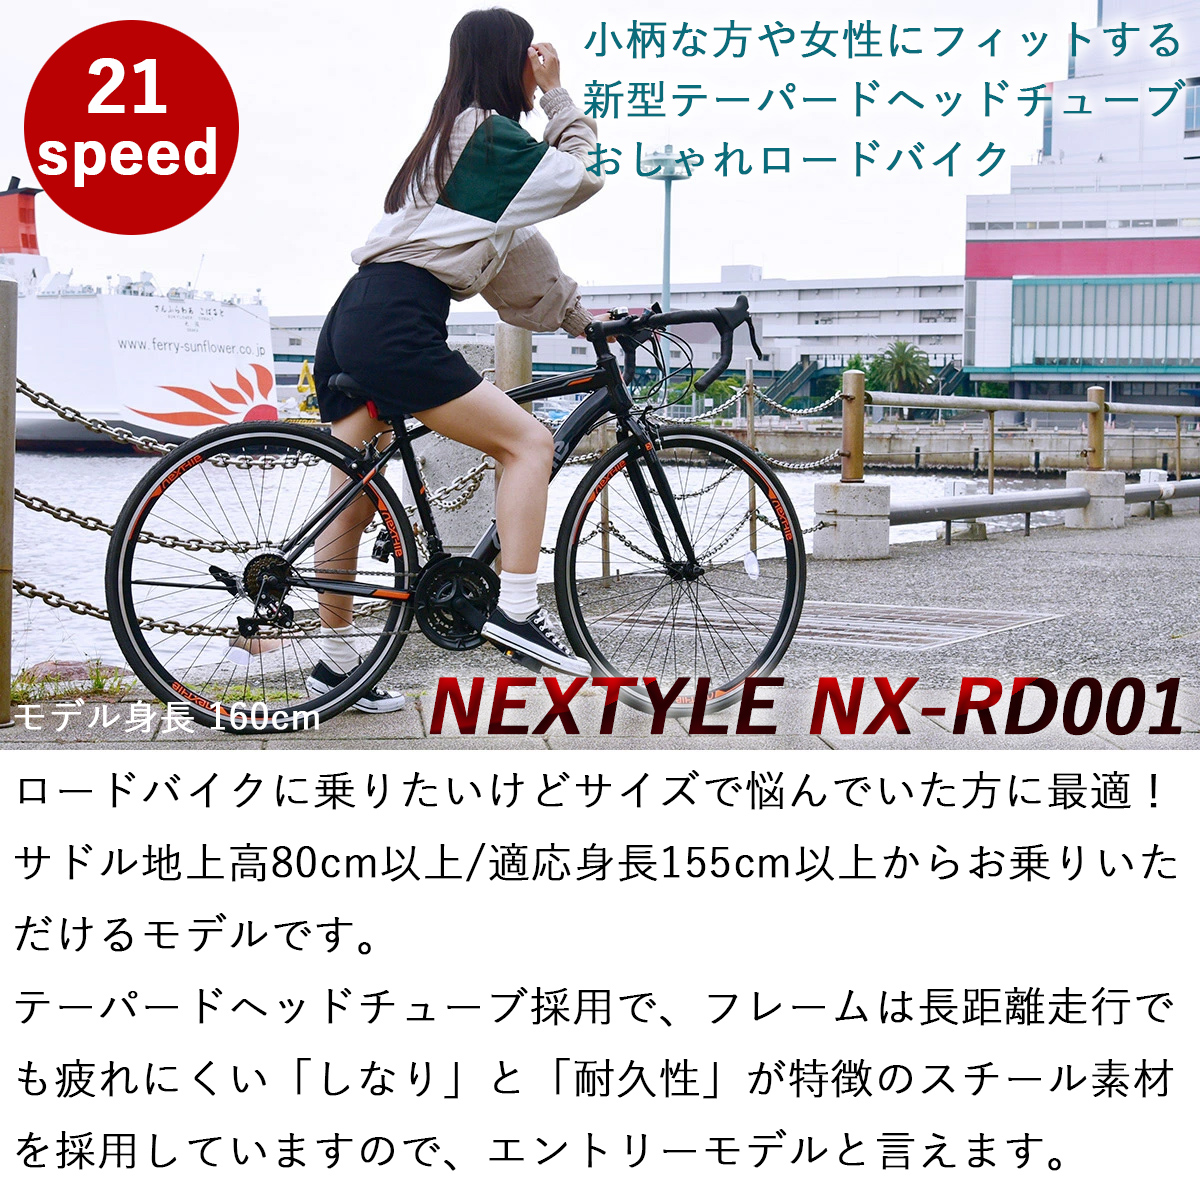  road bike bicycle 700C 700×28C Shimano 21 step shifting gears ta- knee stand attaching load Racer woman entry model beginner nek style NEXTYLE NX-RD001